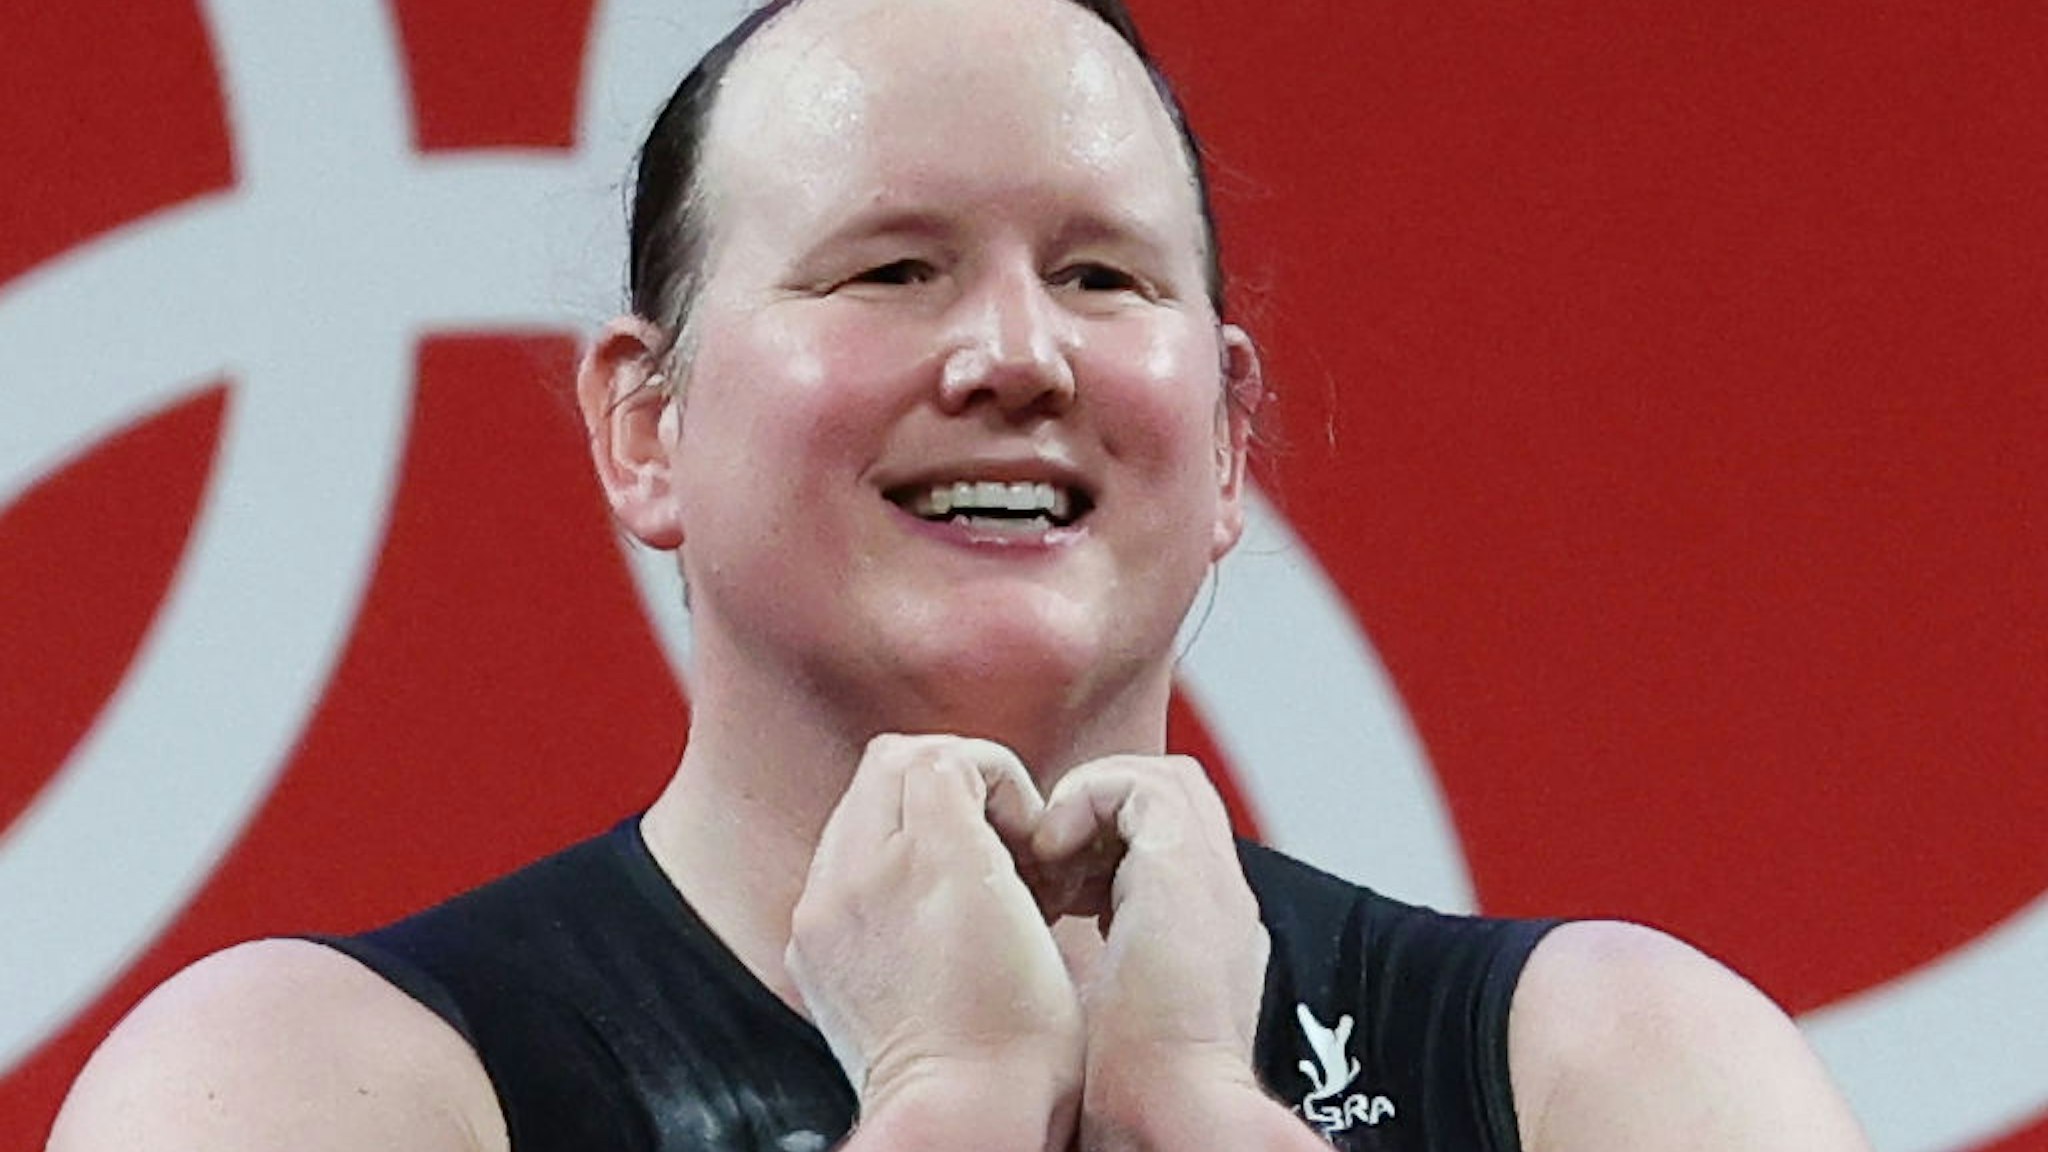 New Zealand's Laurel Hubbard competes in the women's +87kg group A final weightlifting event during the 2020 Summer Olympic Games at the Tokyo International Forum. Laurel Hubbard is the first transgender woman to compete in the Olympics.